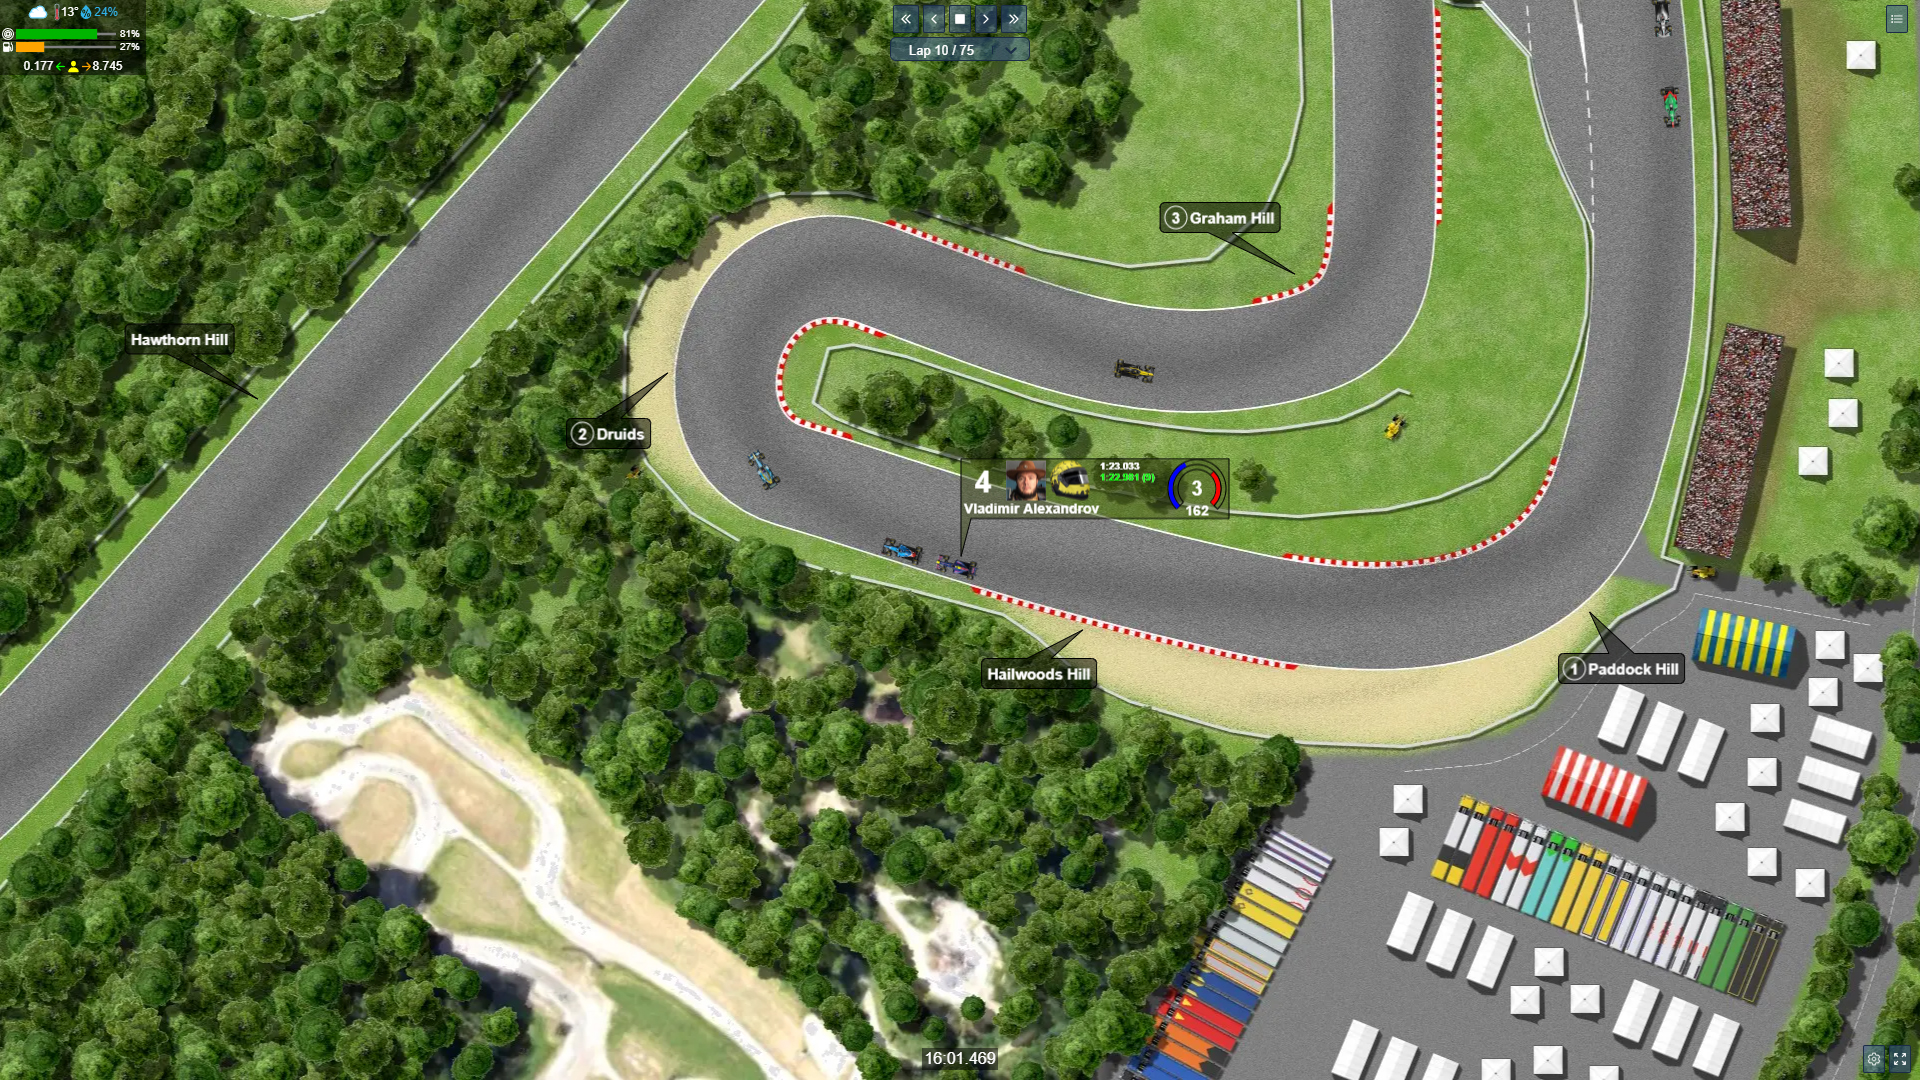 free for ios instal GPRO - Classic racing manager